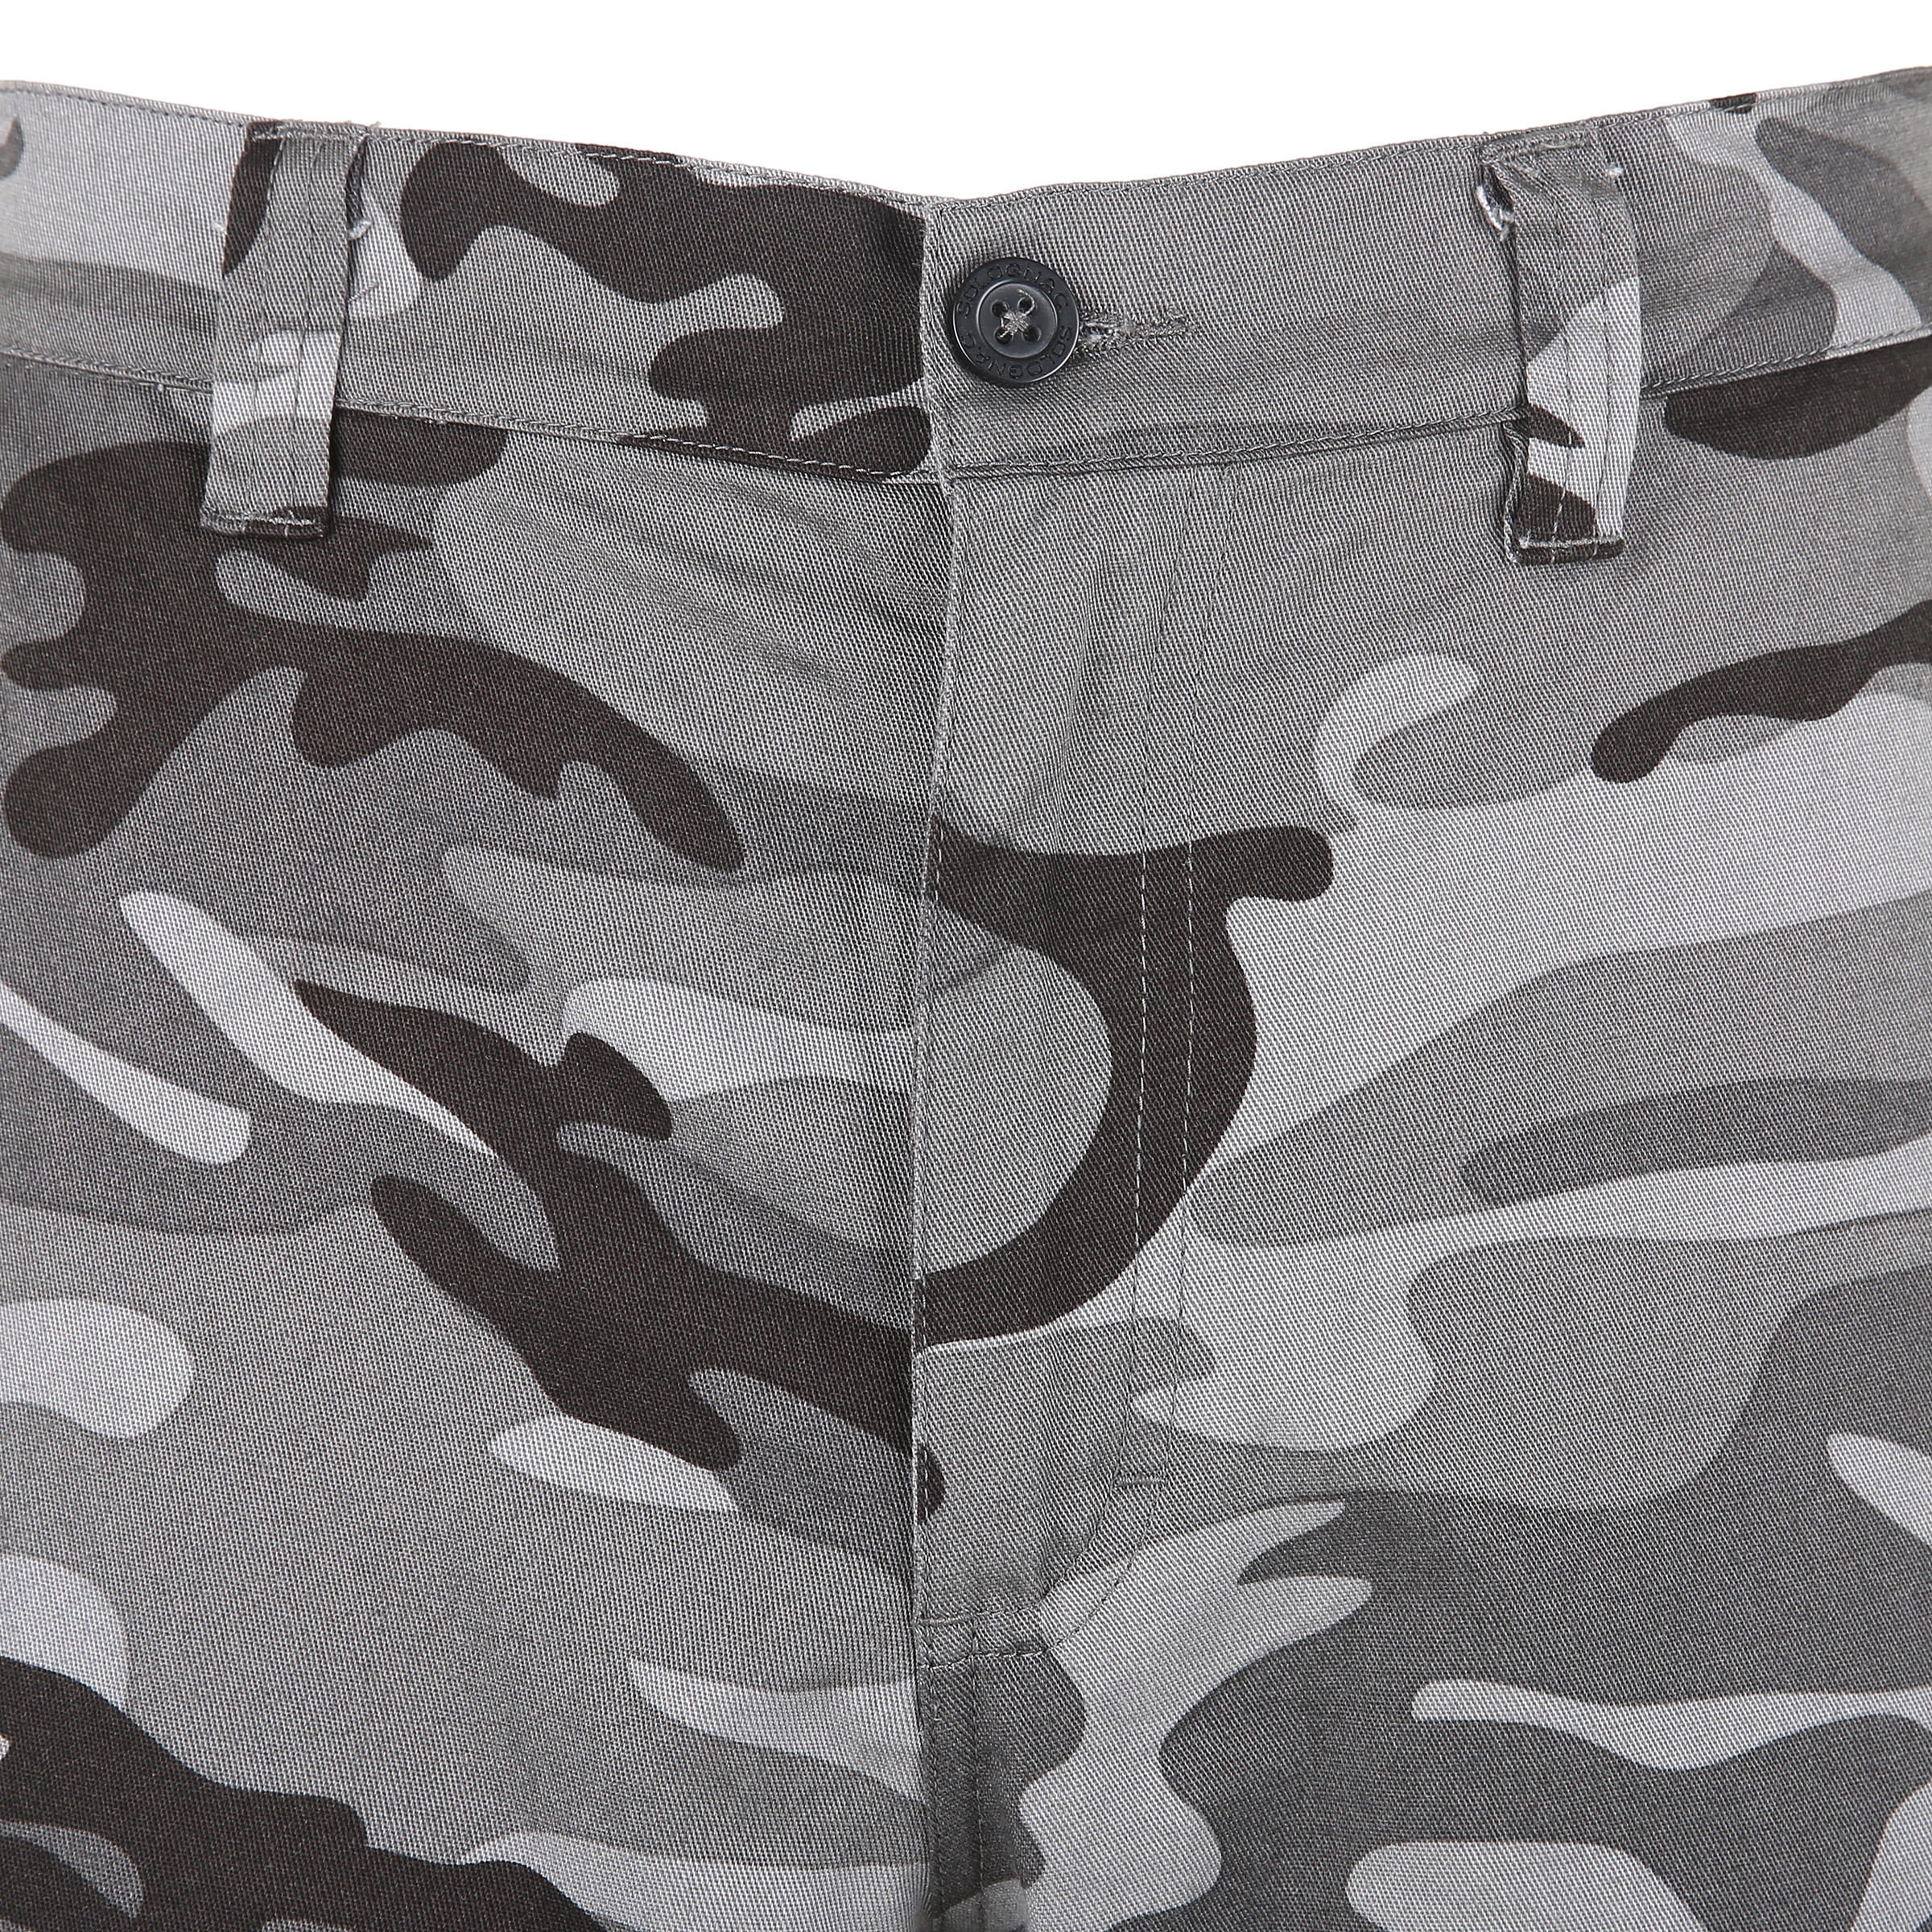 Buy Camouflaged Pants for Outdoor Sports Online at decathlonin